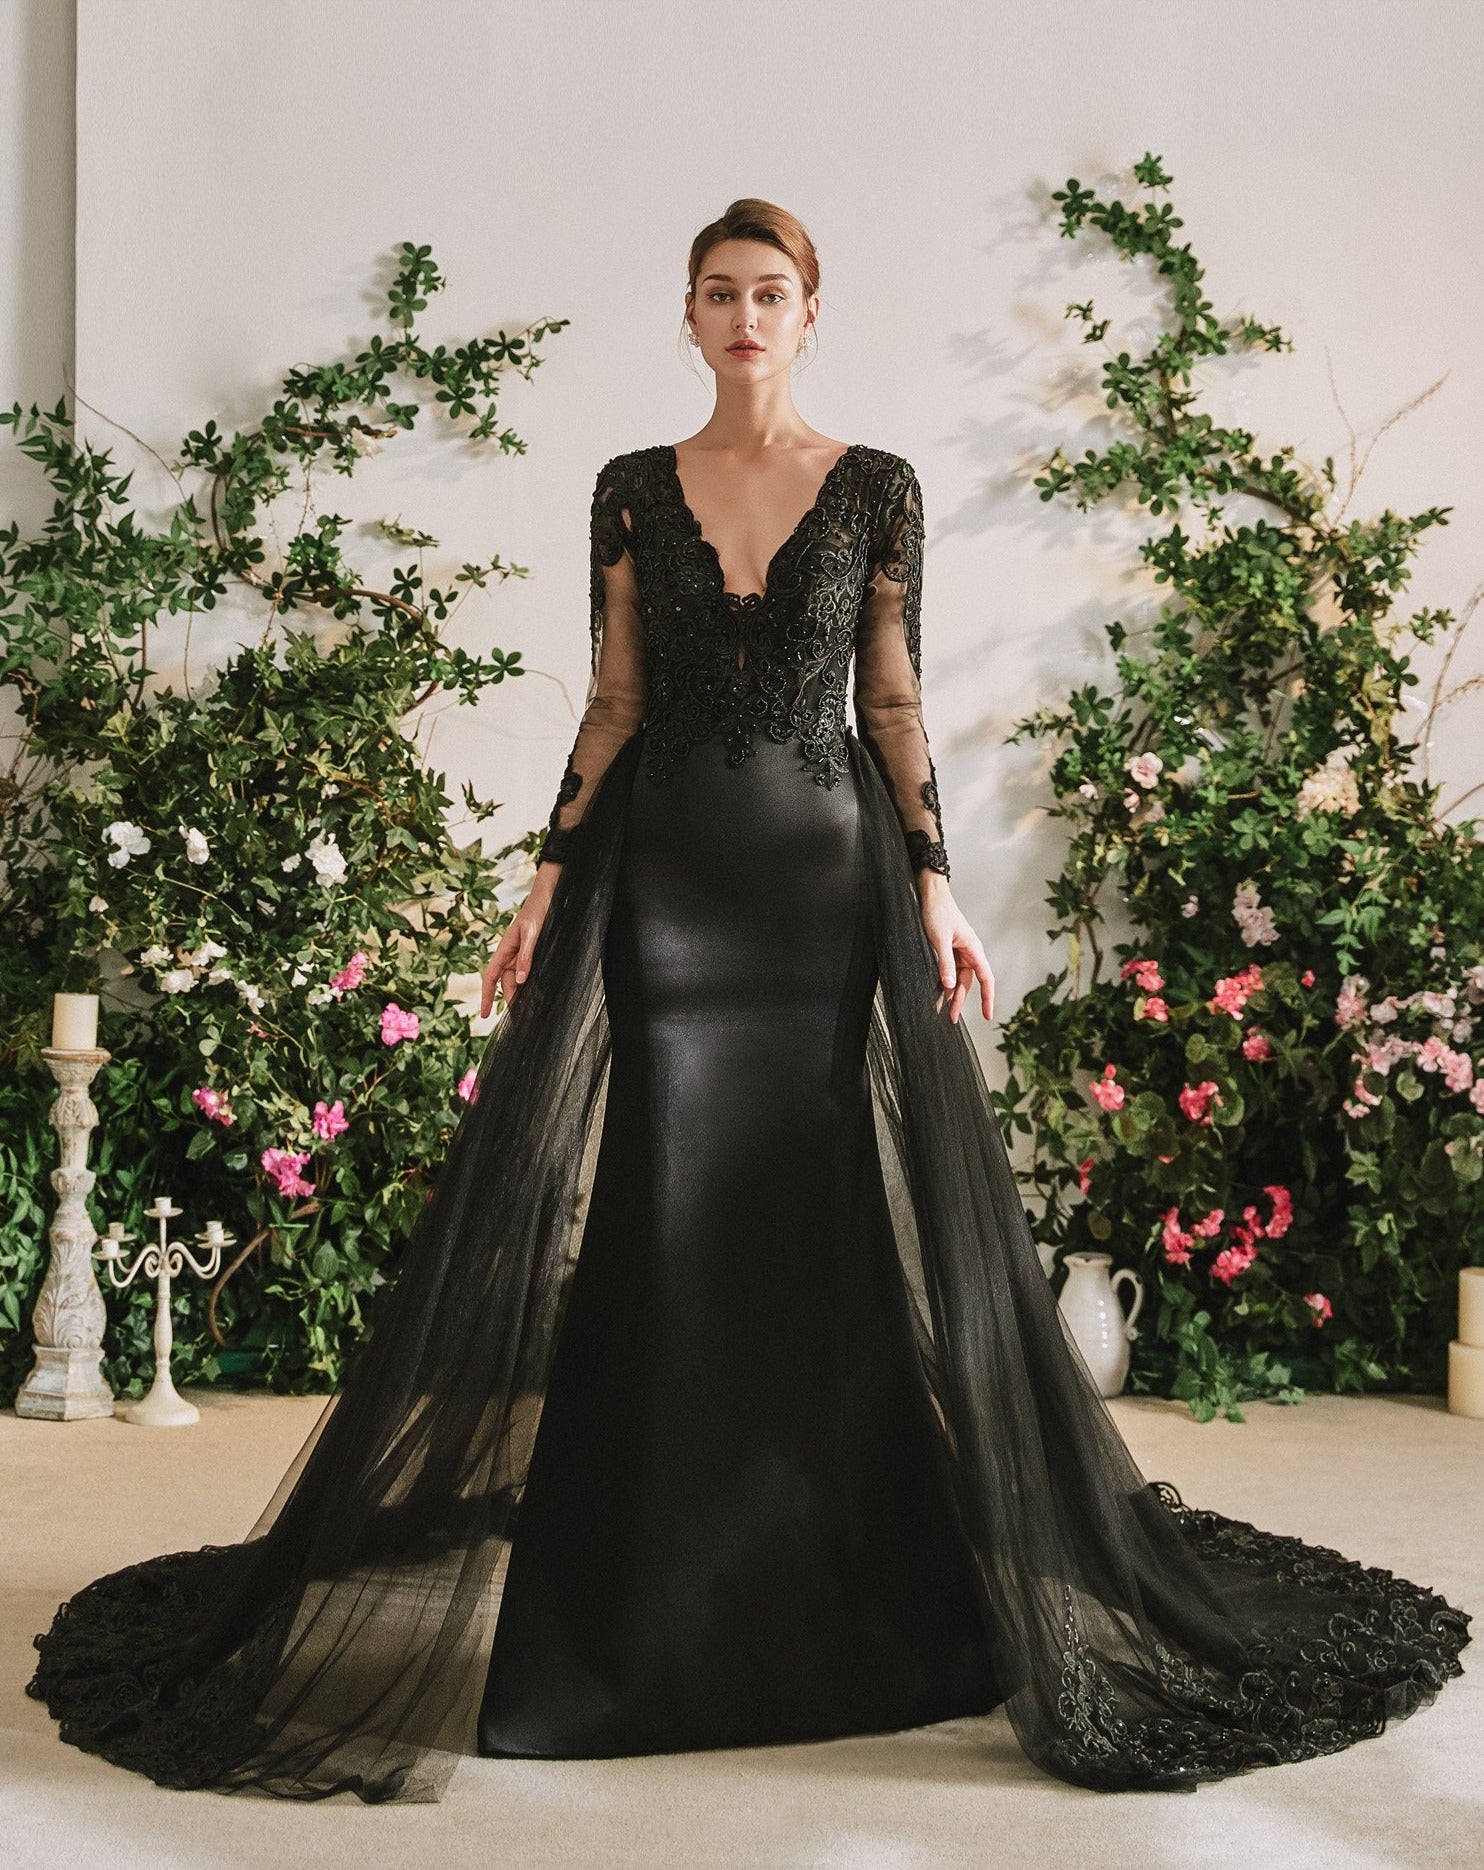 Top 10 Red and Black Wedding Dresses | Roses & Rings